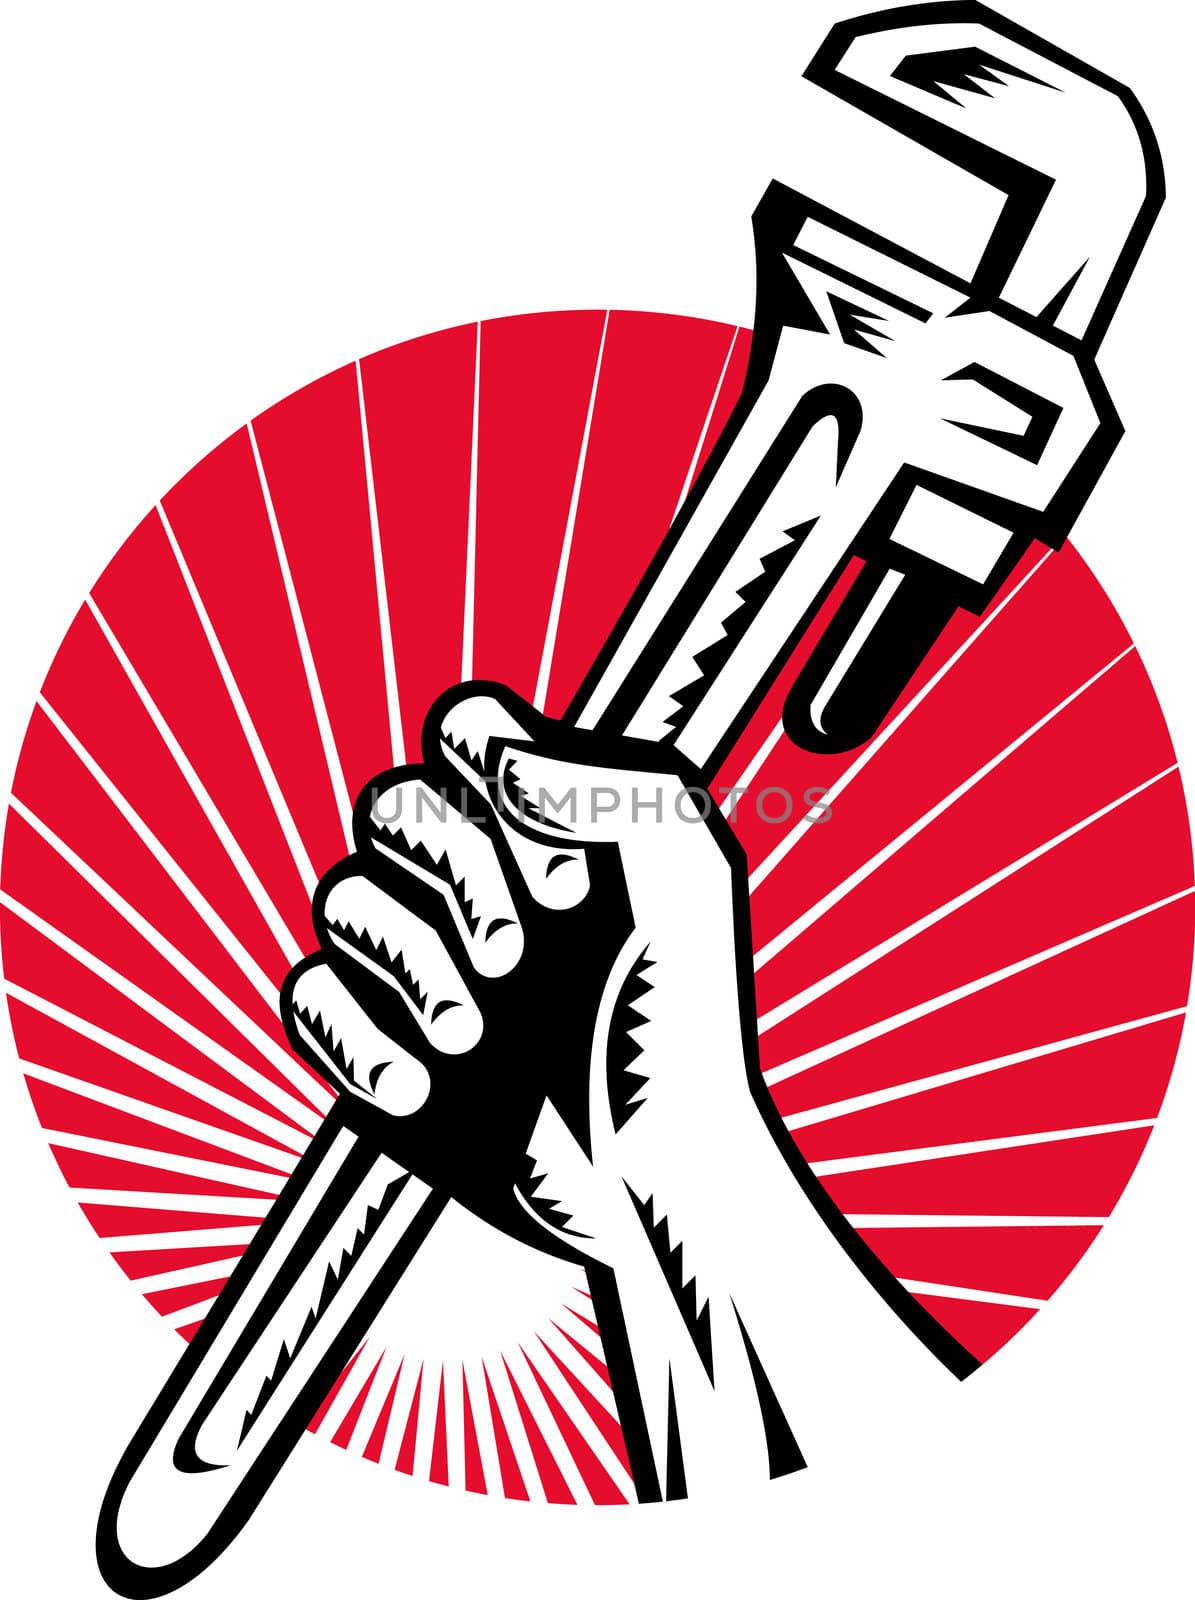 illustration of a Plumber hand holding monkey wrench side view set inside circle with sunburst done in retro style